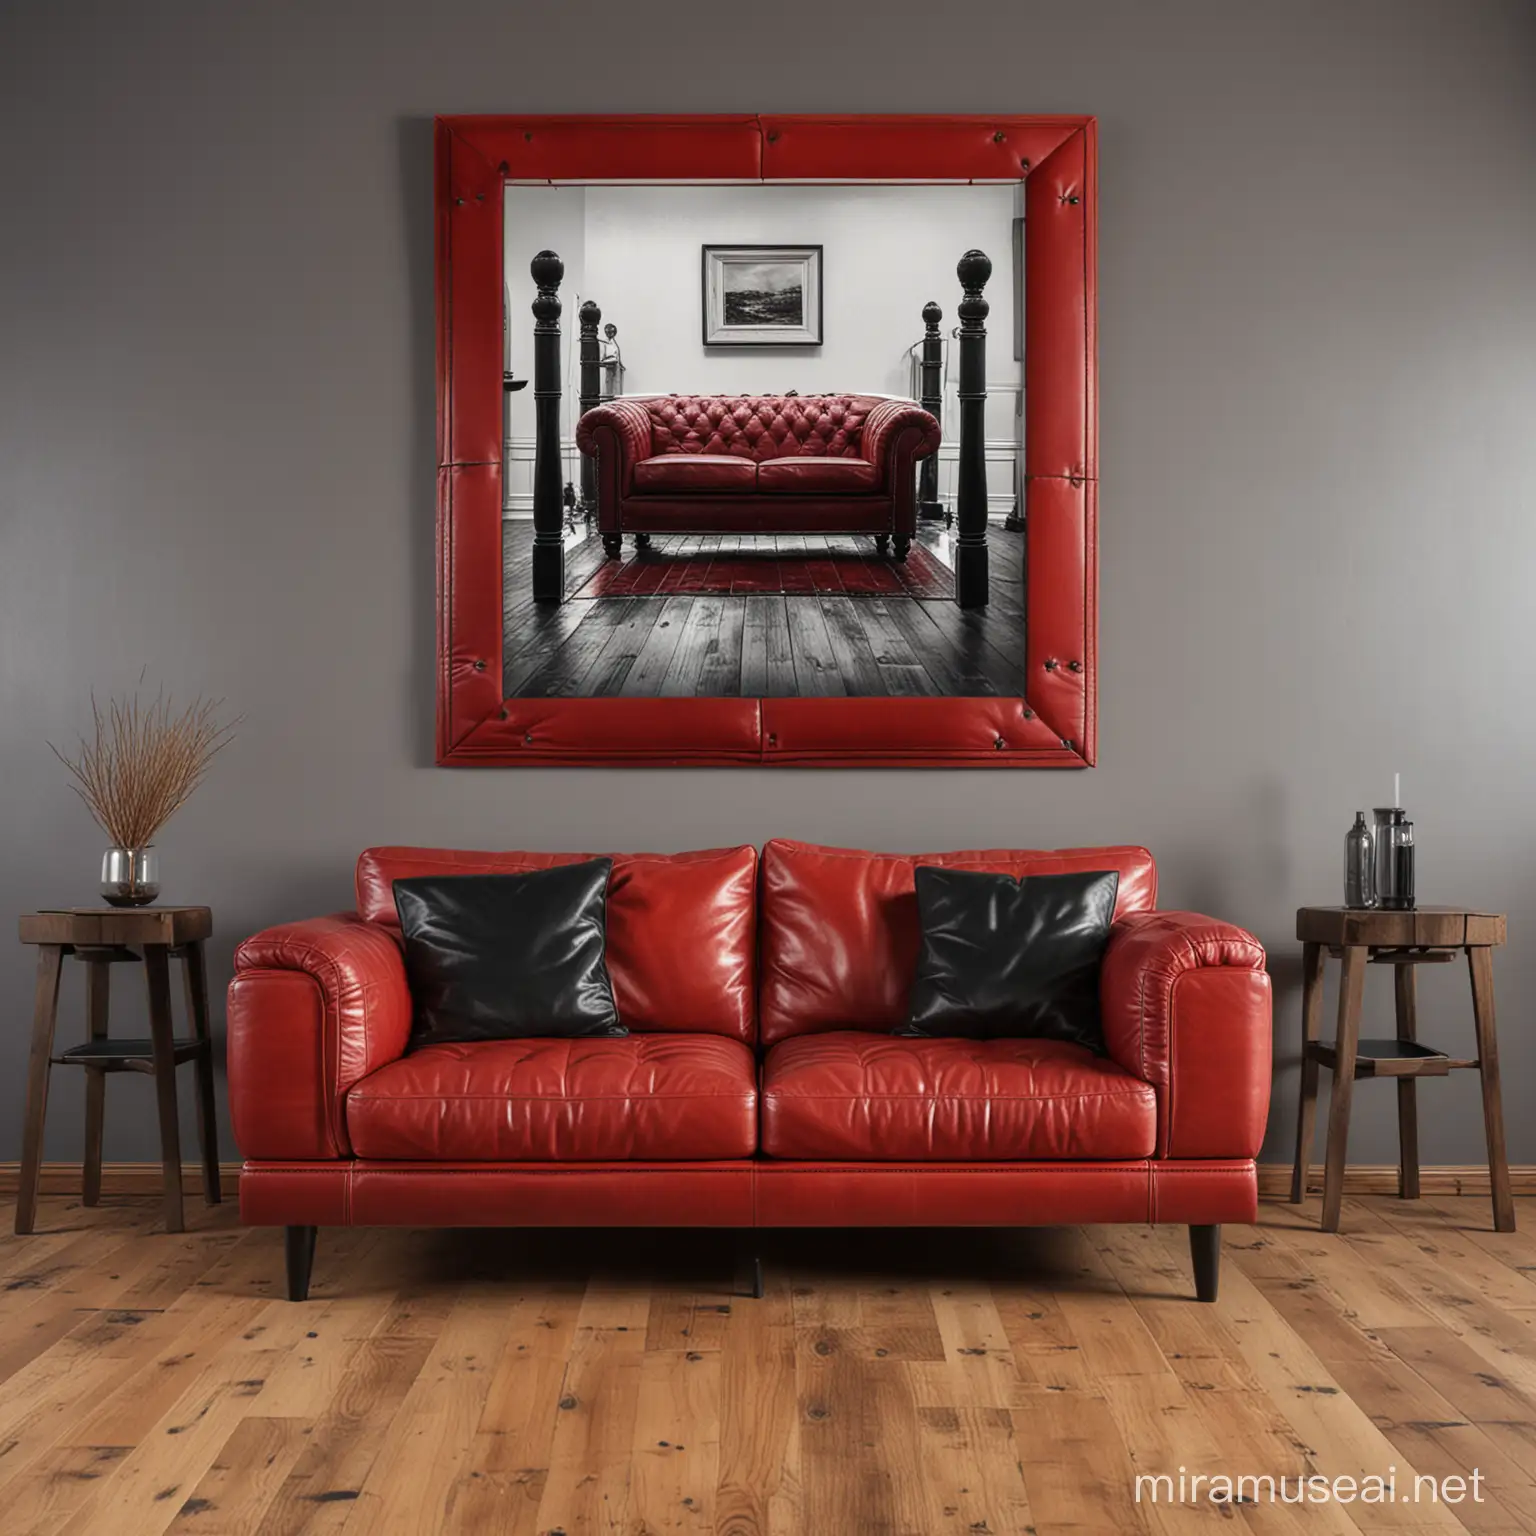 A living room with wooden floor and wooden posts in red and black, behind the red leather sofa hangs a square picture, vivid, detailed, light and shadow